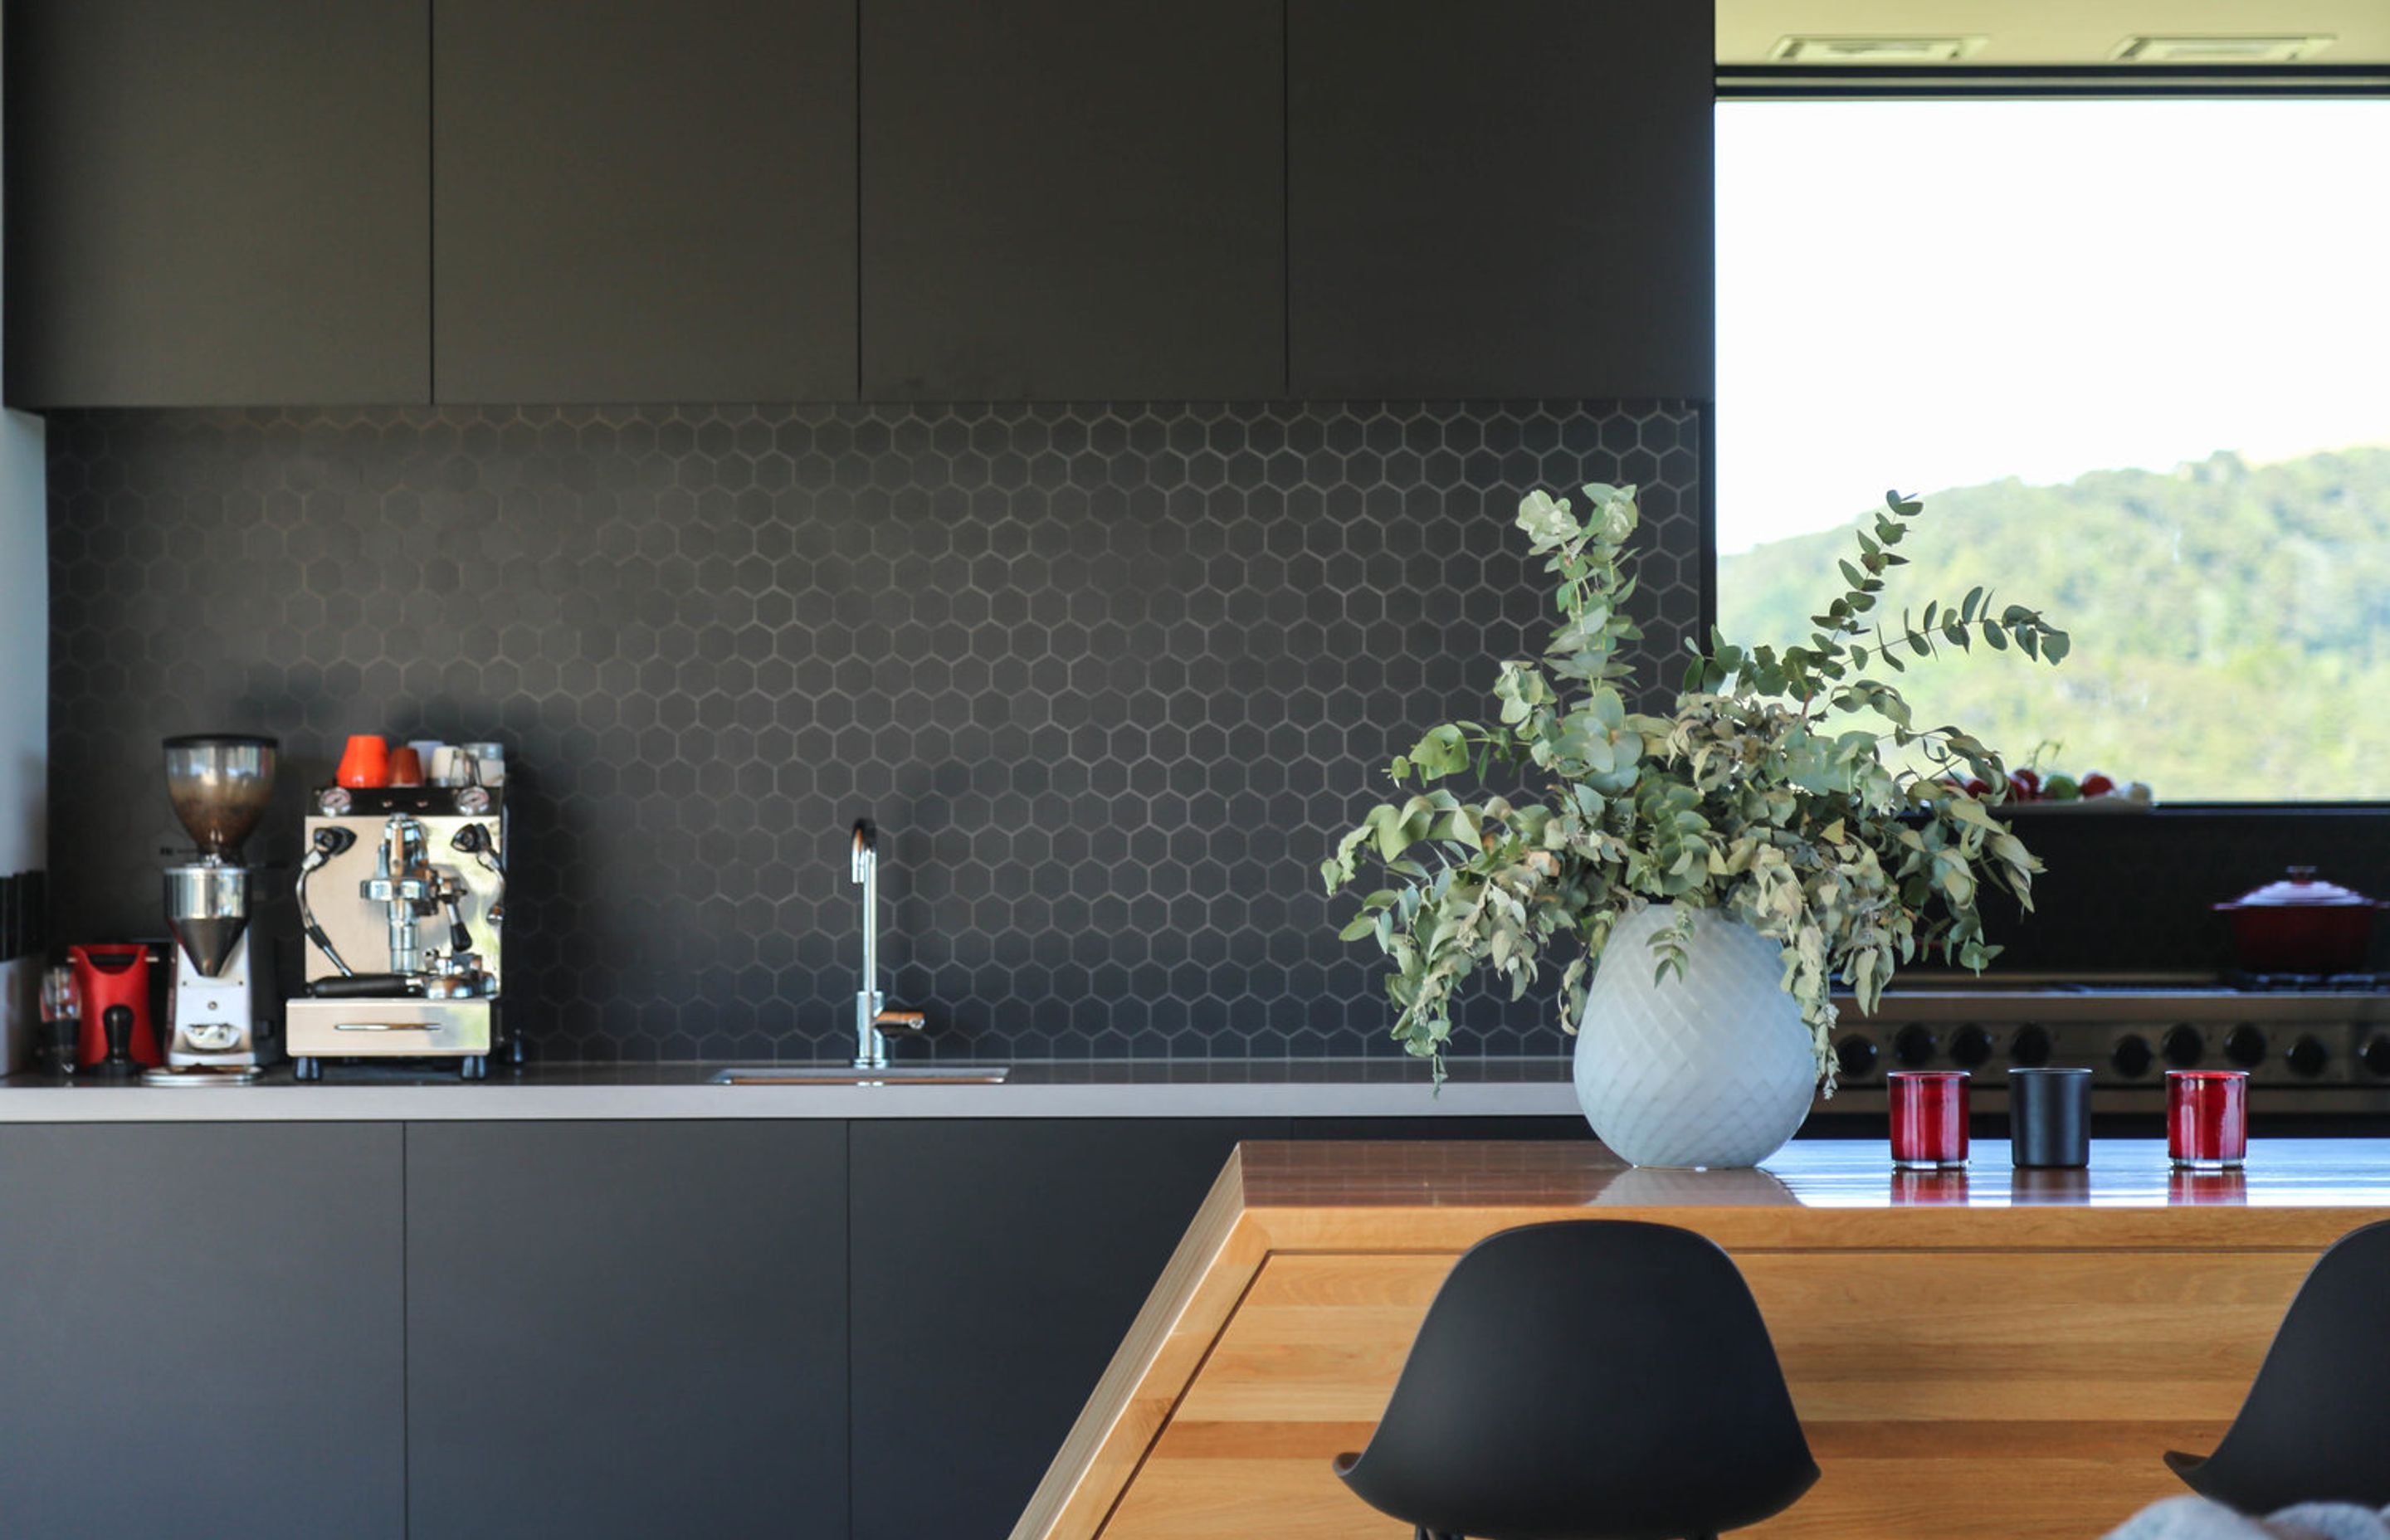 The kitchen features bespoke black cabinetry, black hexagonal tiling, and a sloping bar made from Southland beech.